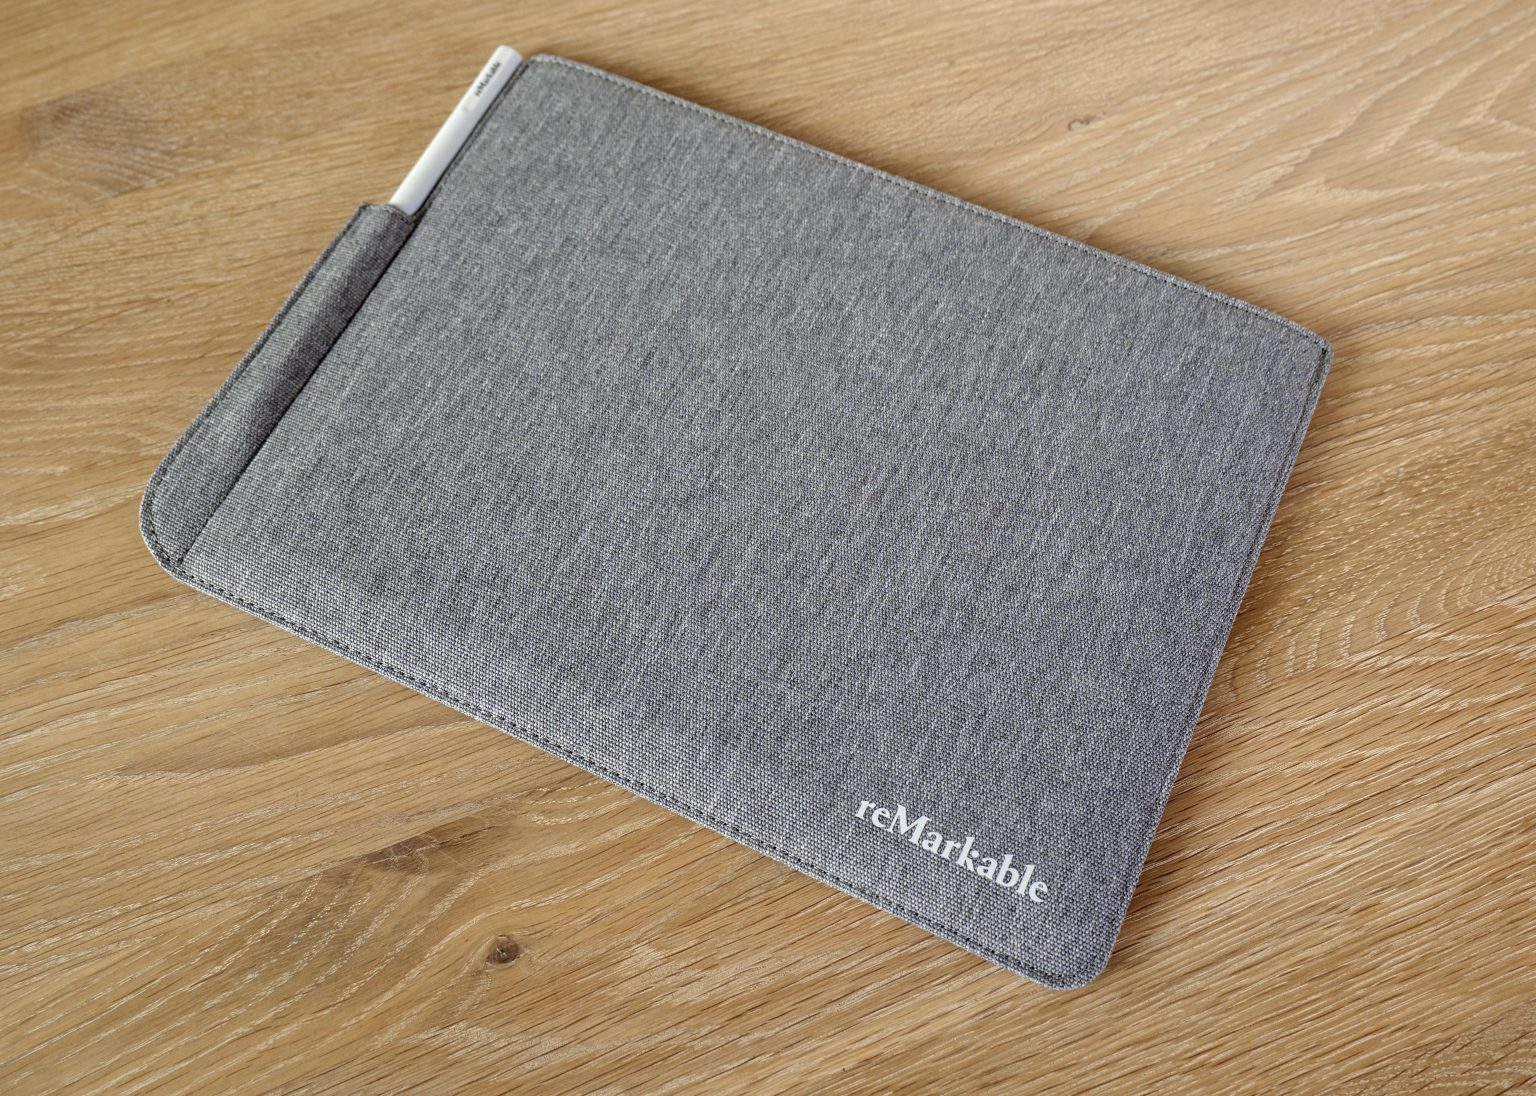 Review: Remarkable 2 | Digital Notebook